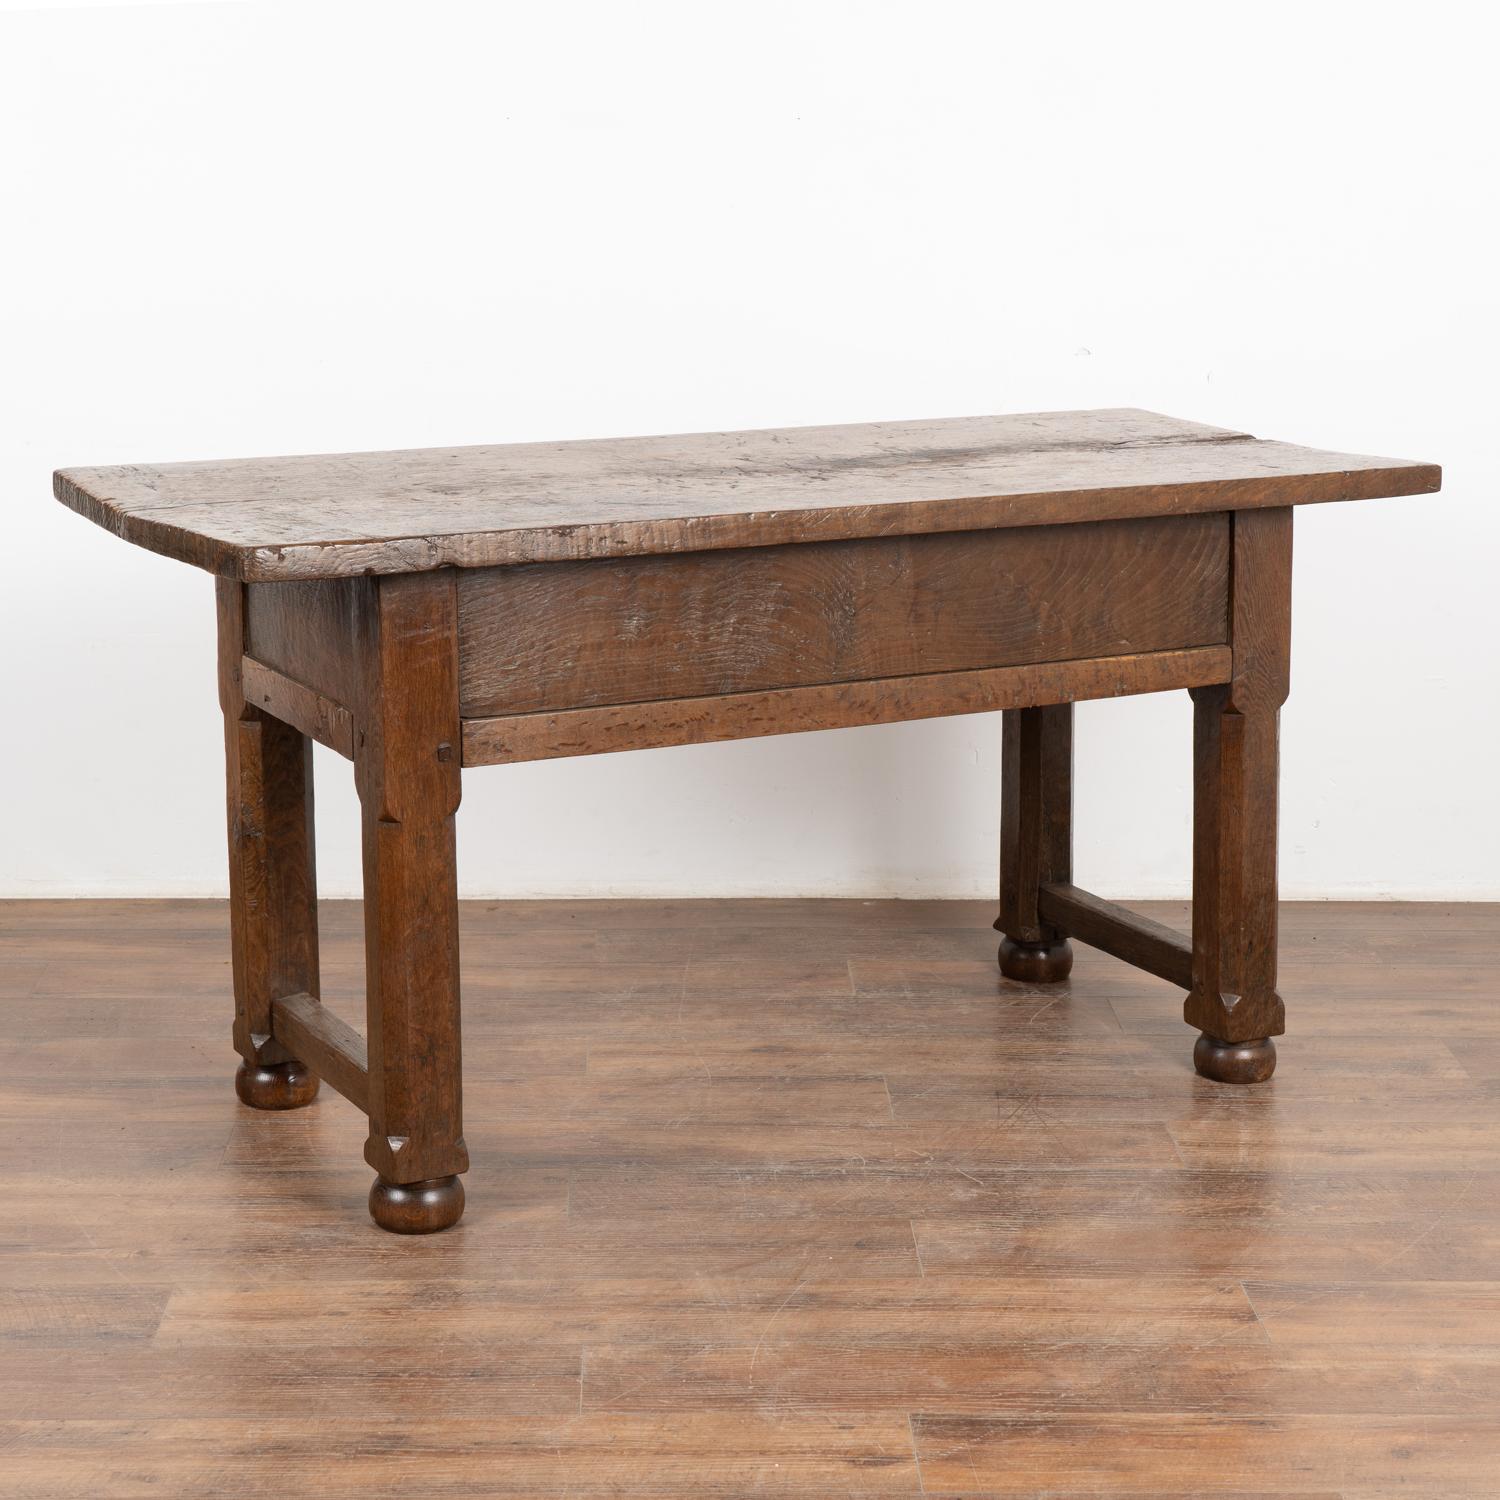 Dark Oak Console Table with Two Drawers, Spain 1800's For Sale 7